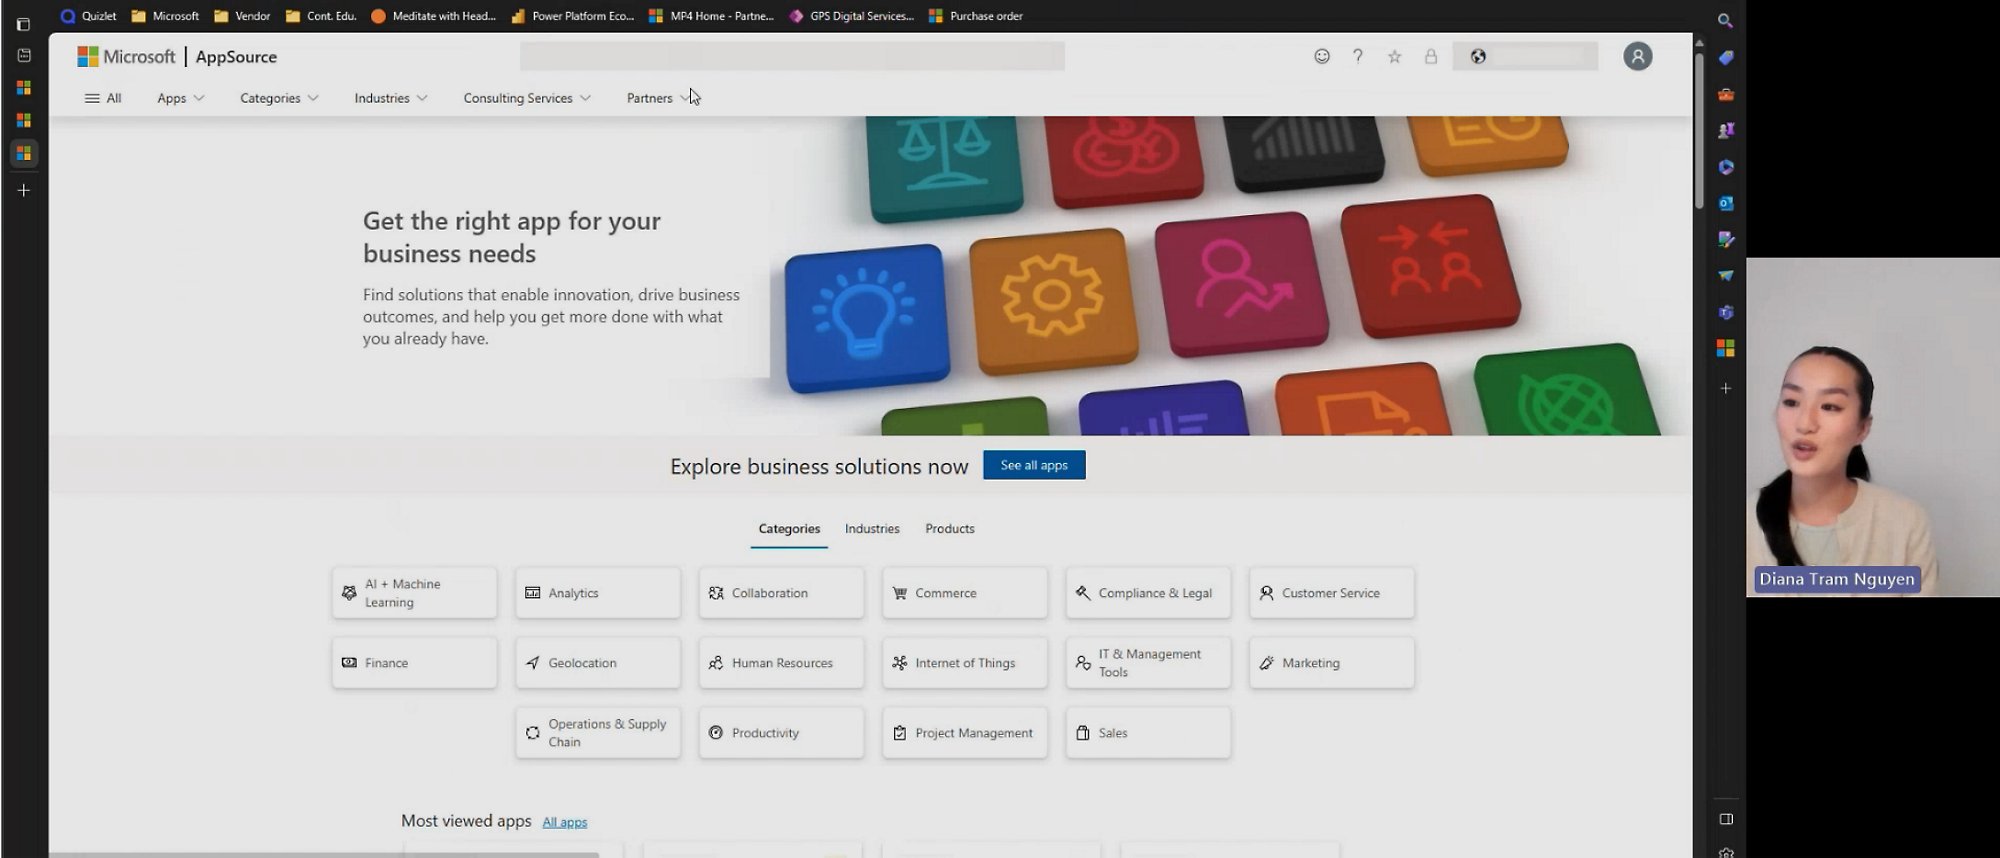 A screen shot of a video showing a page on Microsoft AppSource related to exploring business solutions